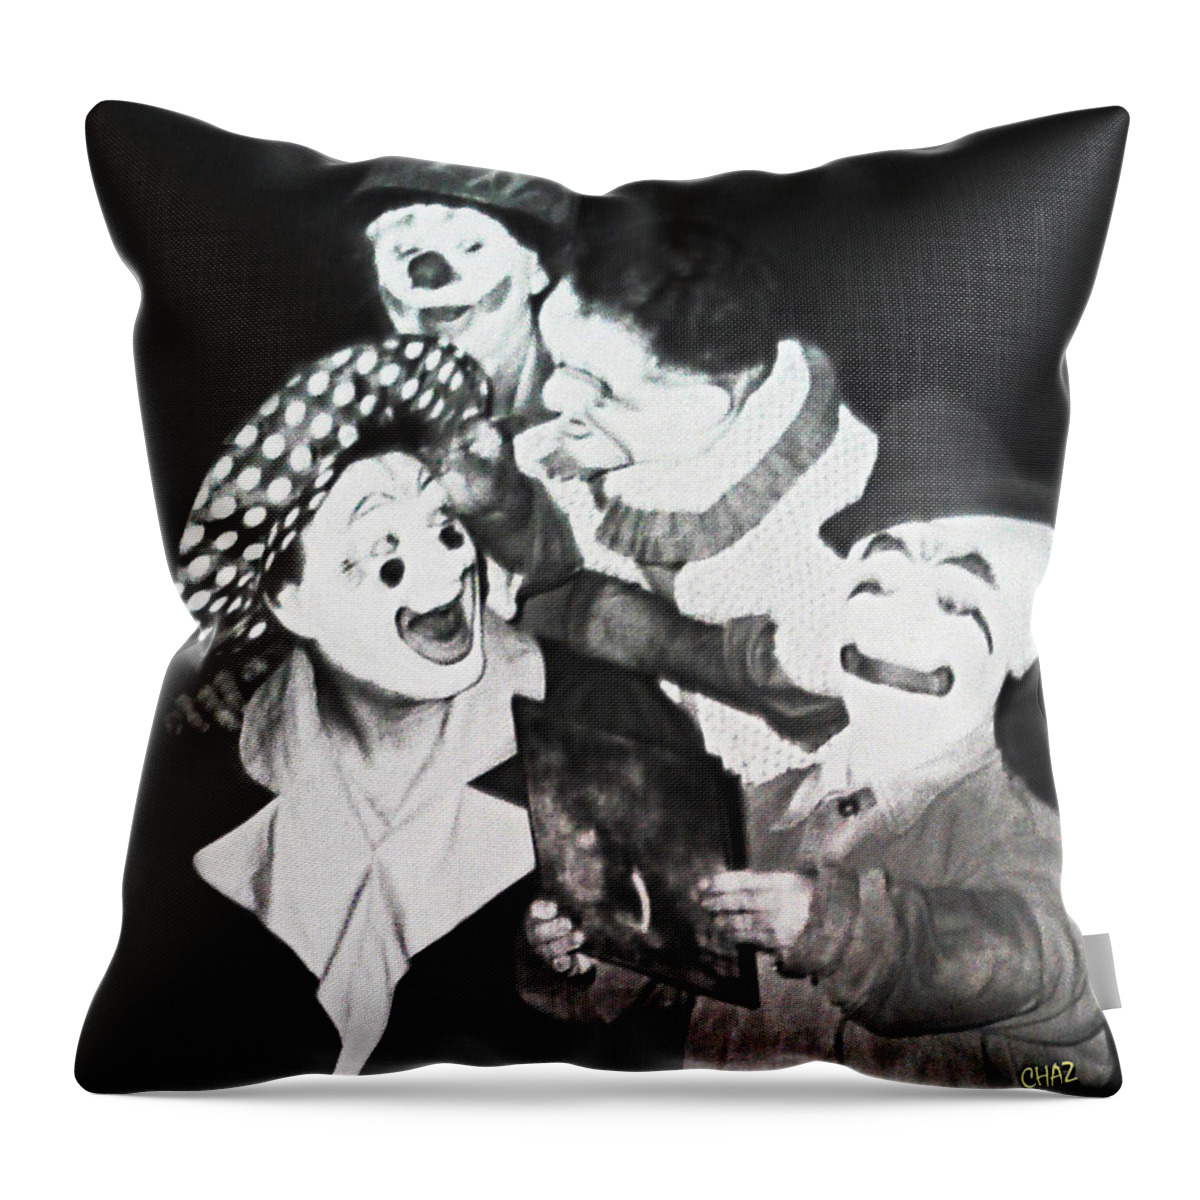 Clown Throw Pillow featuring the photograph Clowning Around by CHAZ Daugherty